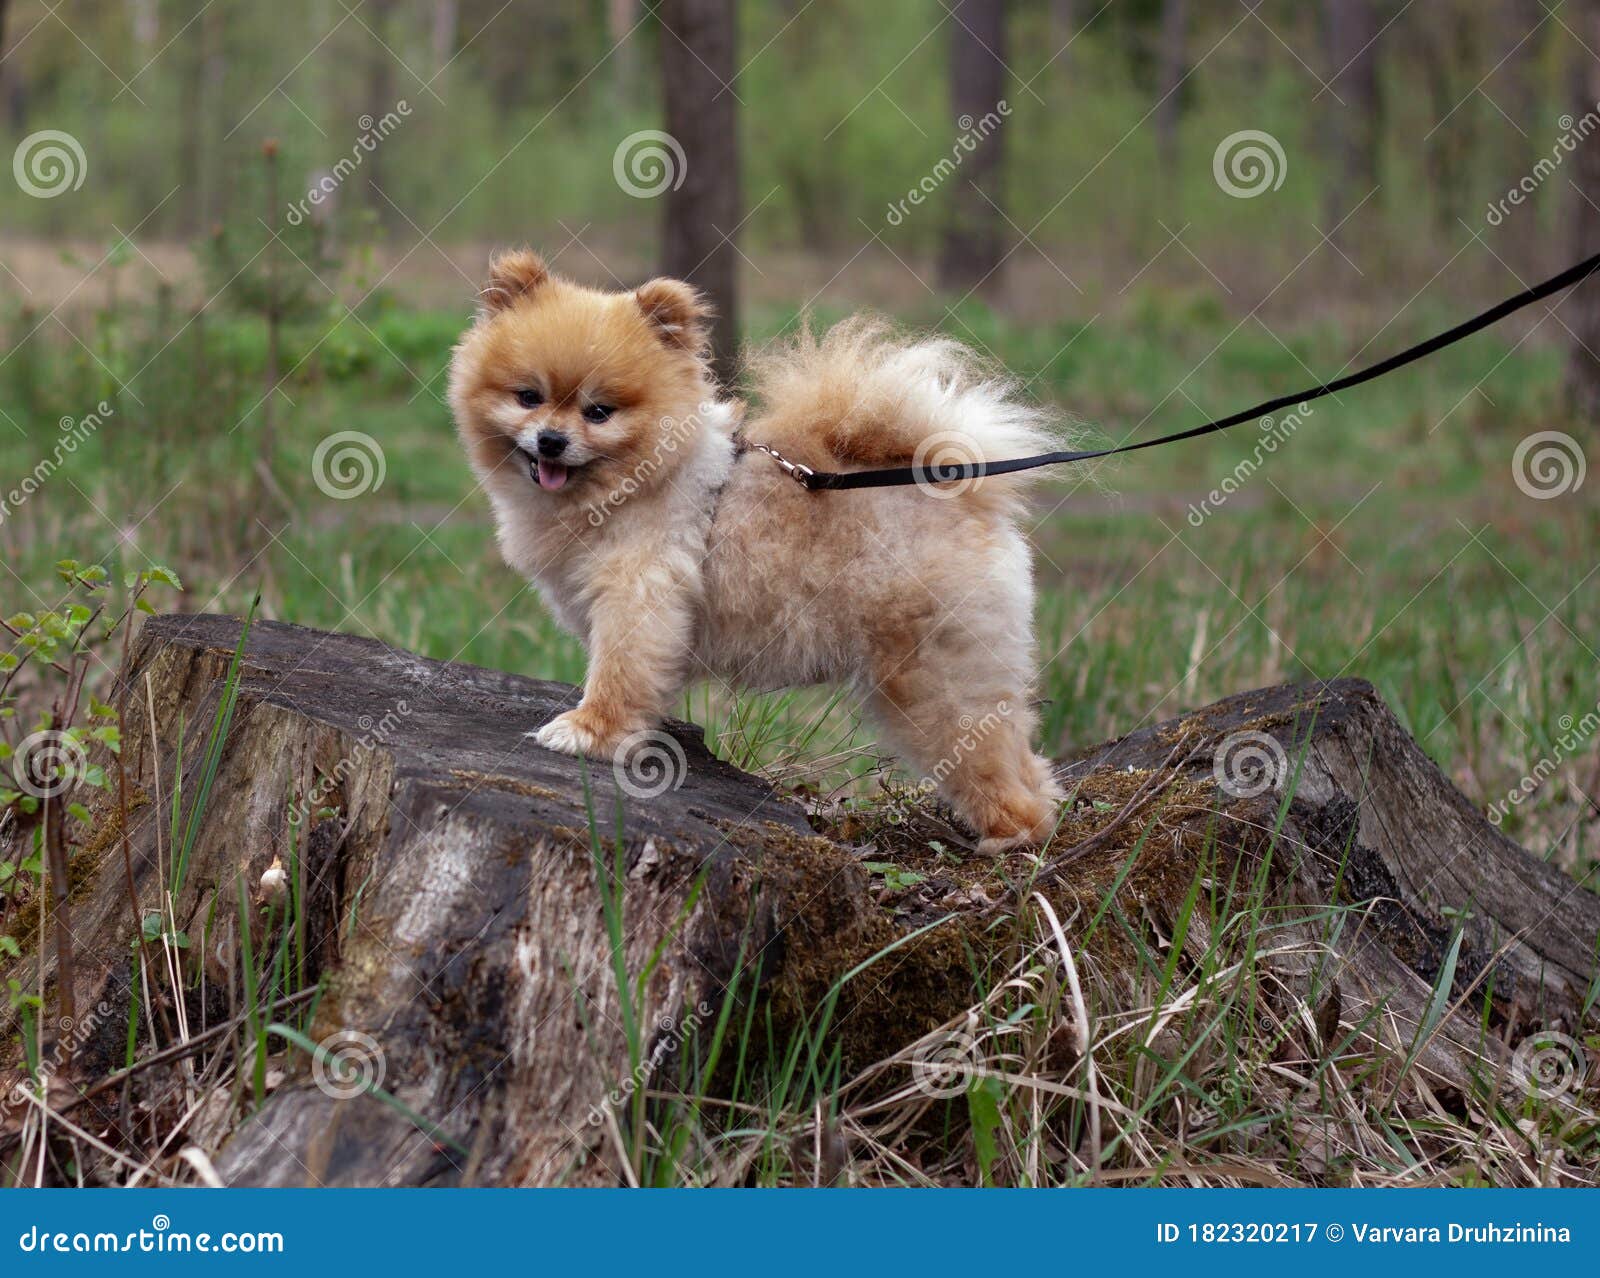 Pomeranian Mini Teddy Bear Red Color Stands on a Stump in the Forest  Sideways Dog on a Leash Stock Image - Image of orange, portrait: 182320217